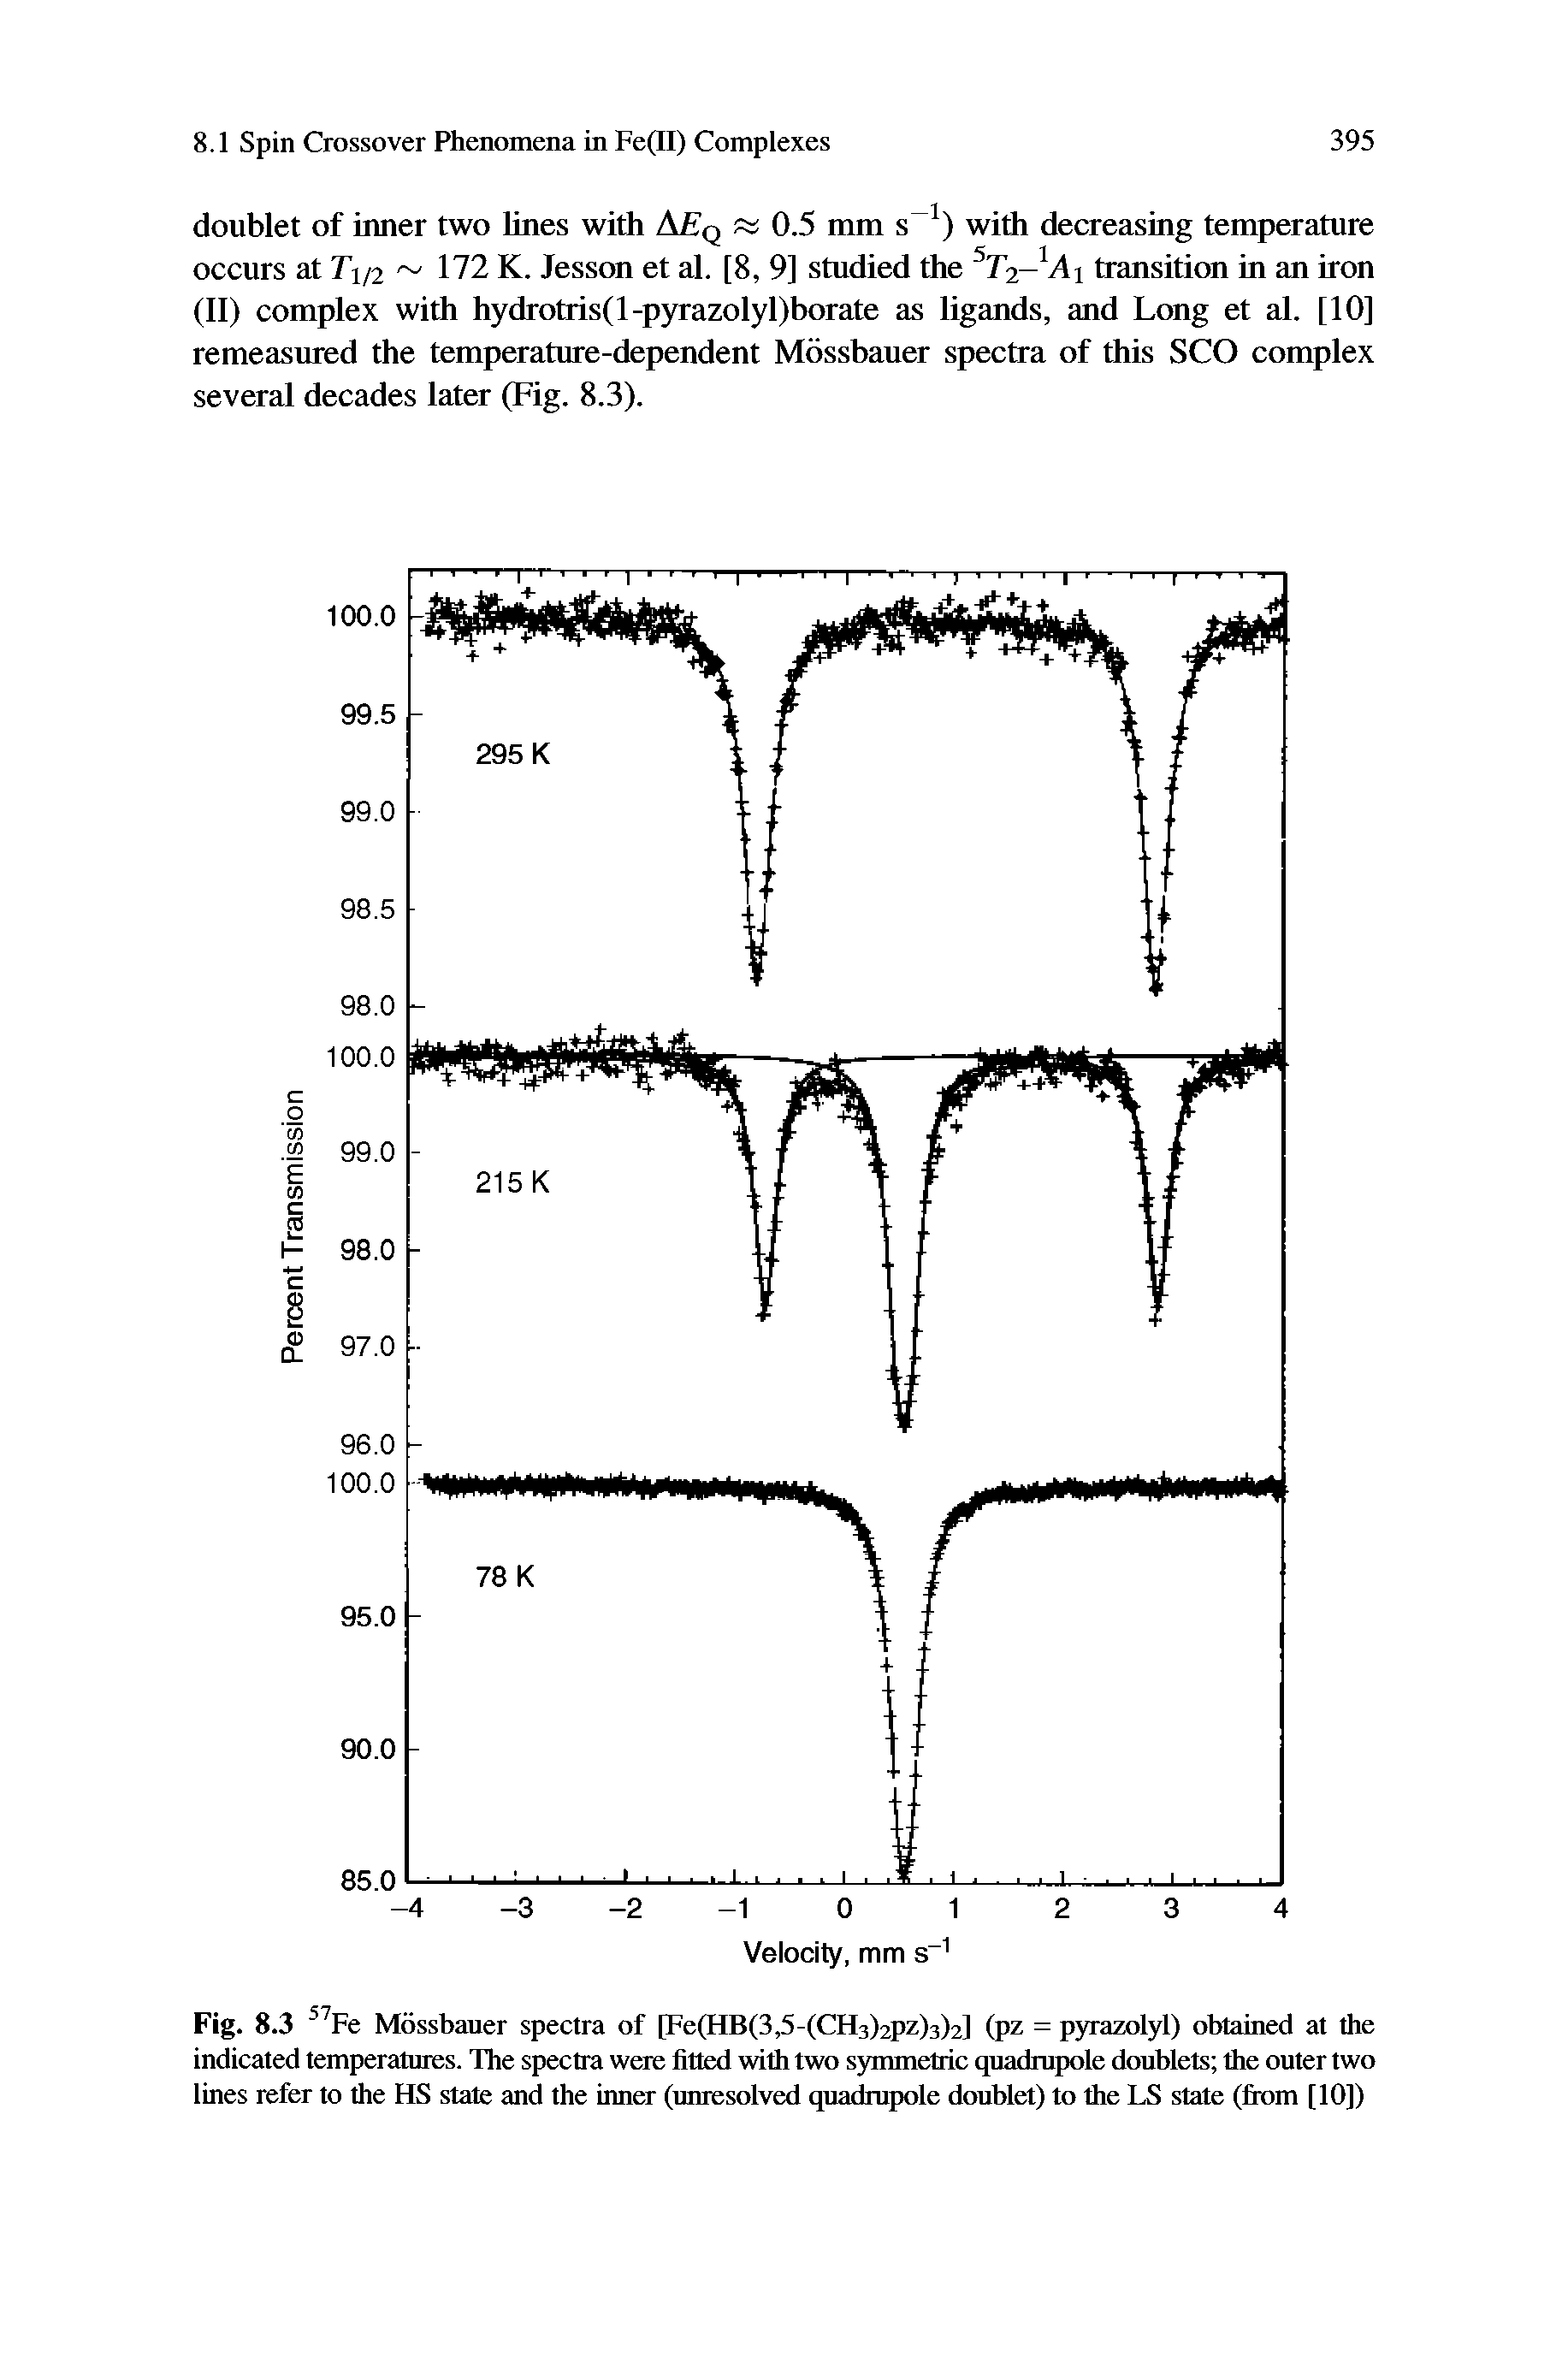 Fig. 8.3 Fe Mossbauer spectra of [Fe(HB(3,5-(CH3)2pz)3)2] (pz = pyrazolyl) obtained at the indicated temperatures. The spectra were fitted with two symmetric quadrupole doublets the outer two lines refer to the HS state and the inner (unresolved quadrupole doublet) to the LS state (fiom [10])...